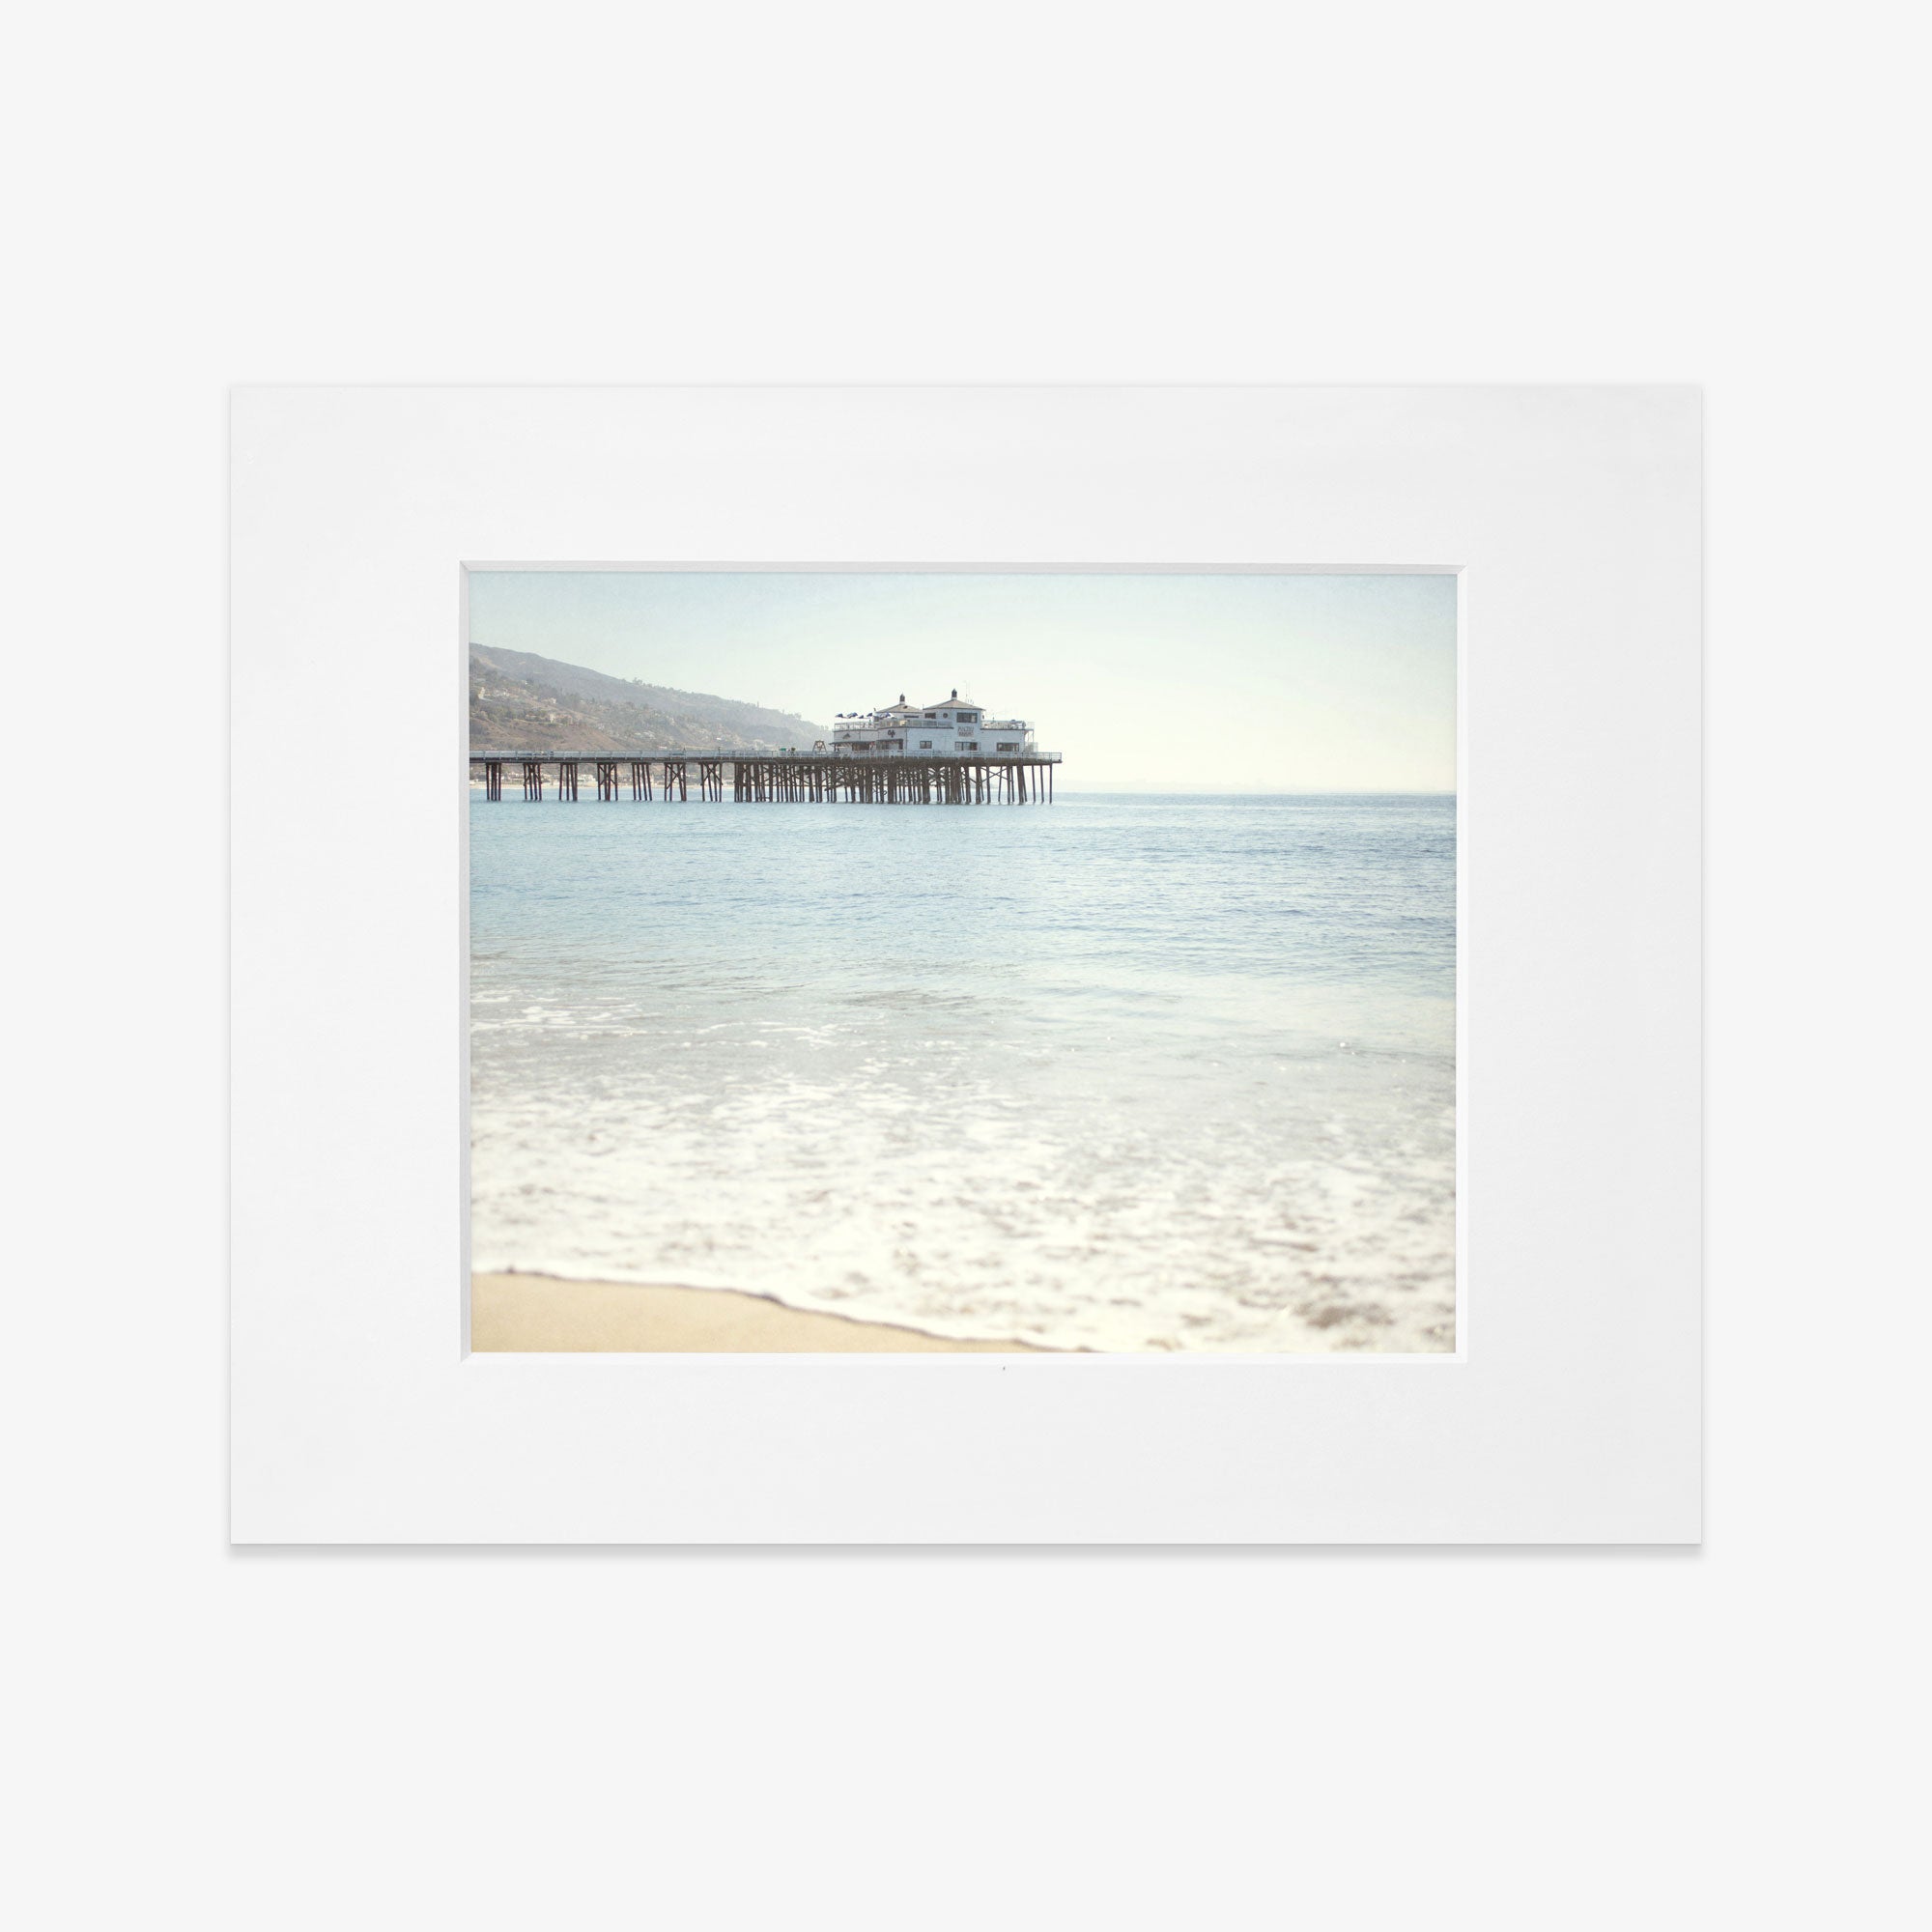 A serene beachscape featuring gentle waves washing ashore, with the Offley Green California Beach Print, &#39;Malibu Pier&#39; extending into the sea under a clear blue sky, framed as a polaroid photo.